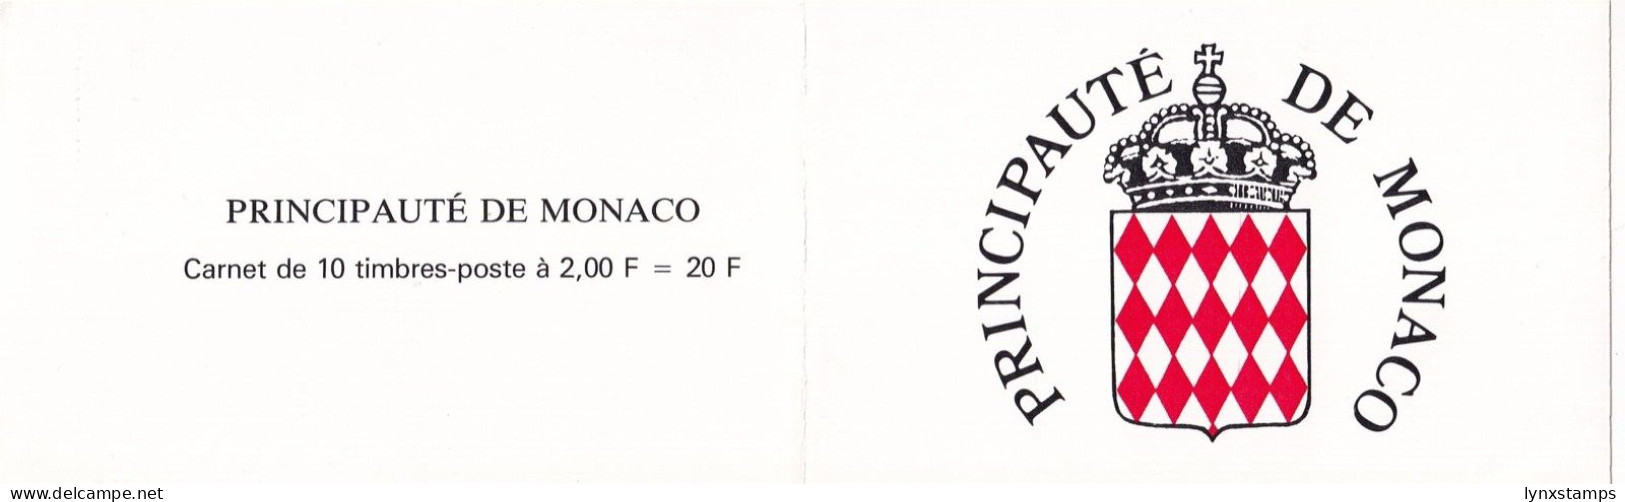 G015 Monaco 1988 Mint Stamps Booklet - Carnets